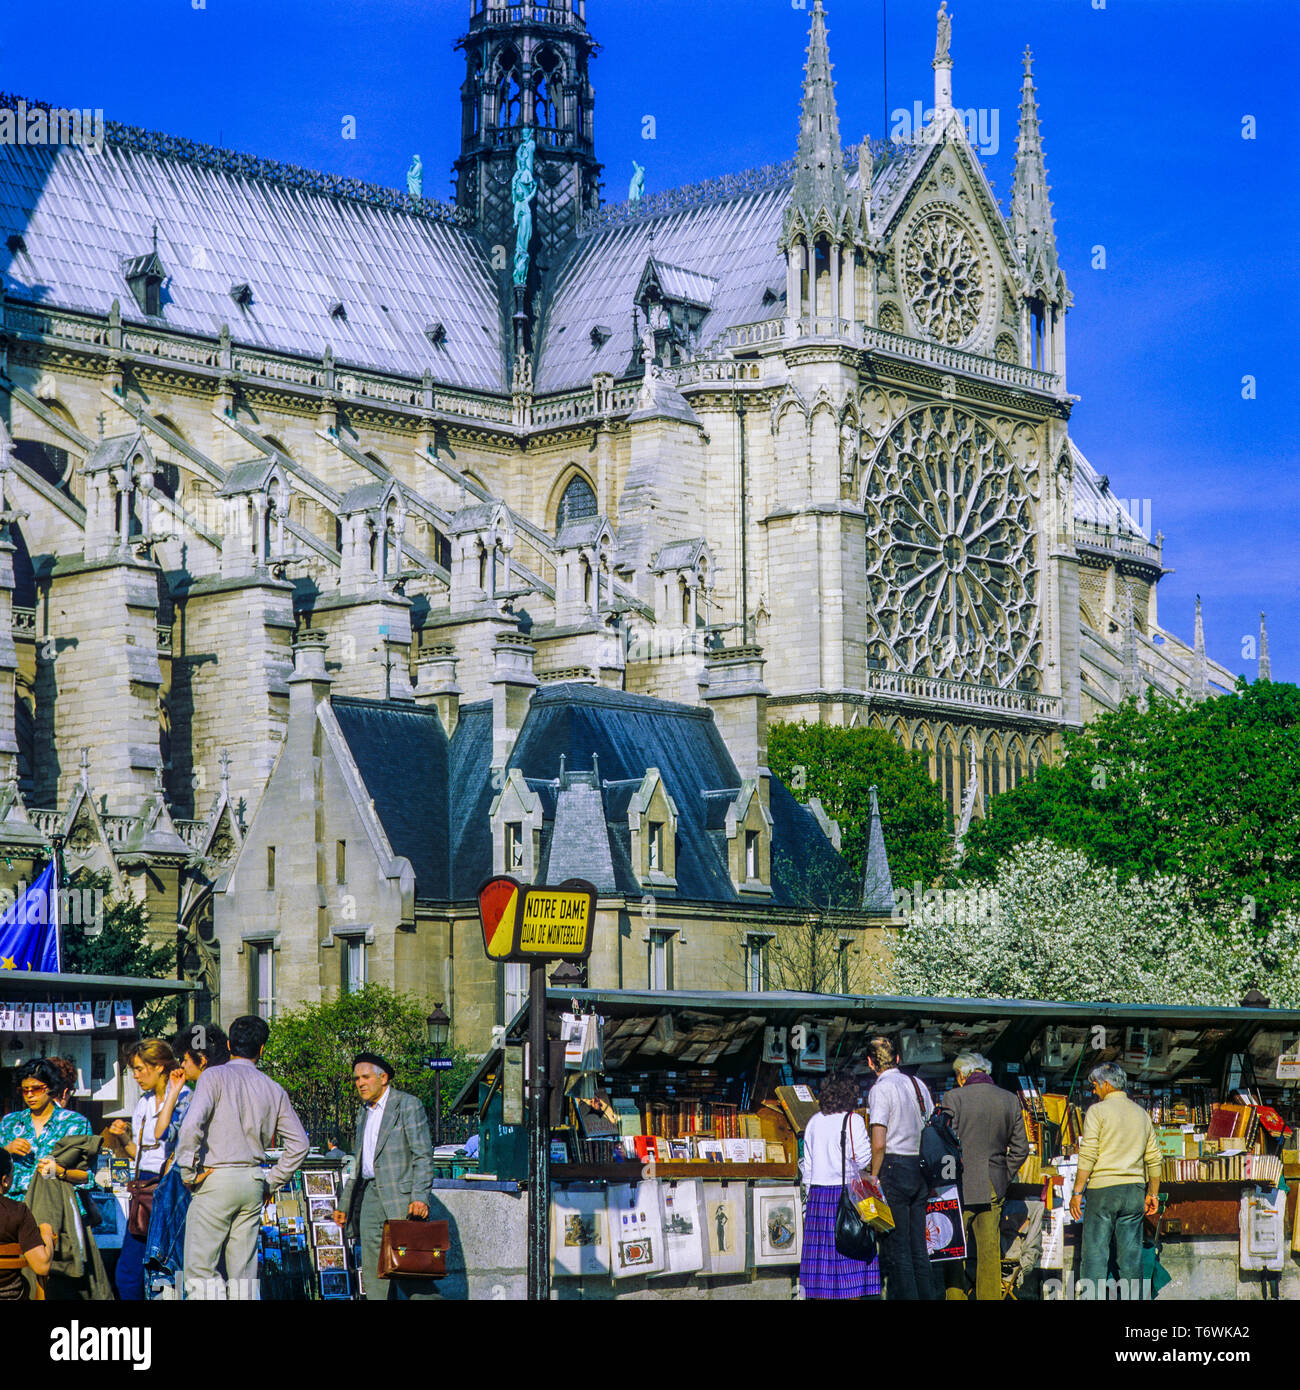 Bouquinistes second hand booksellers, Notre-Dame de Paris cathedral before the fire of April 15, 2019, south facade, Paris, France, Europe, Stock Photo